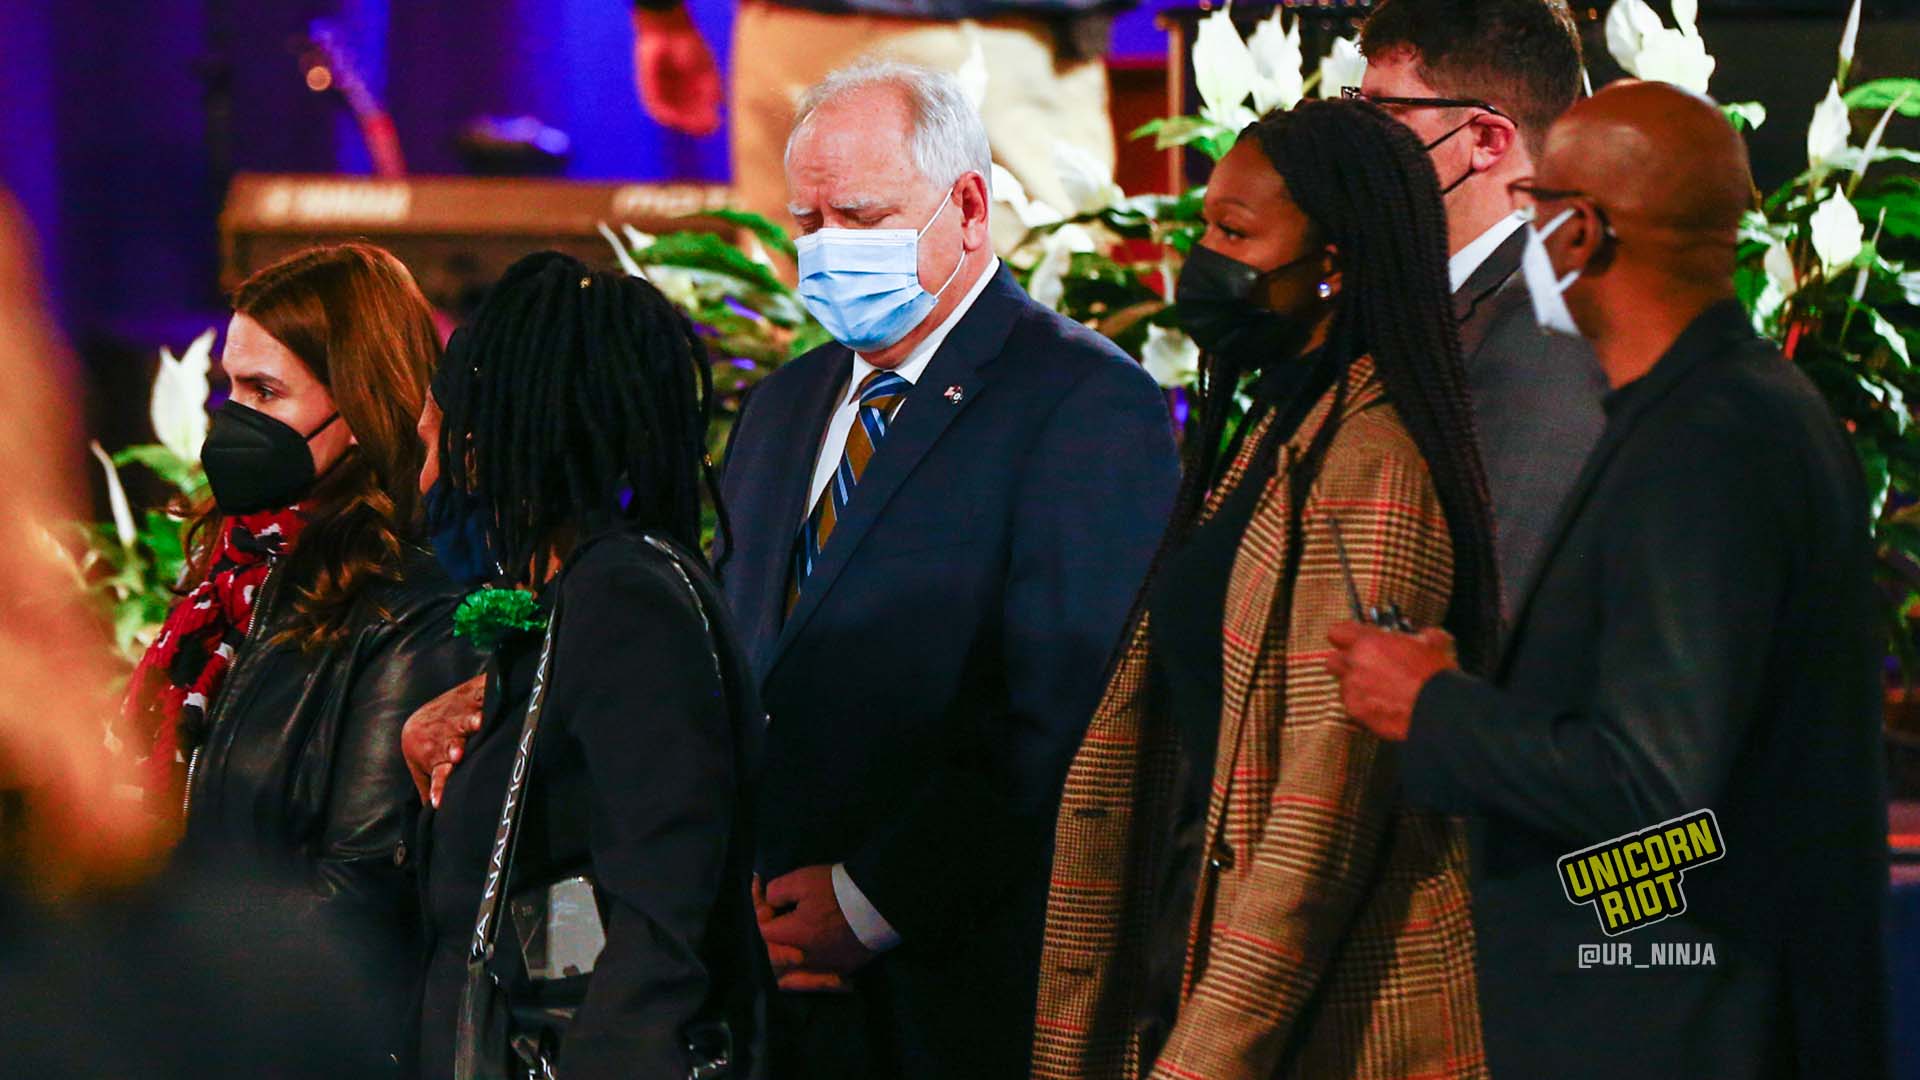 February 17, 2022, Minneapolis, MN: Minnesota Gov. Tim Walz walks towards the casket of Amir Locke before the start of the funeral at Shiloh Temple.